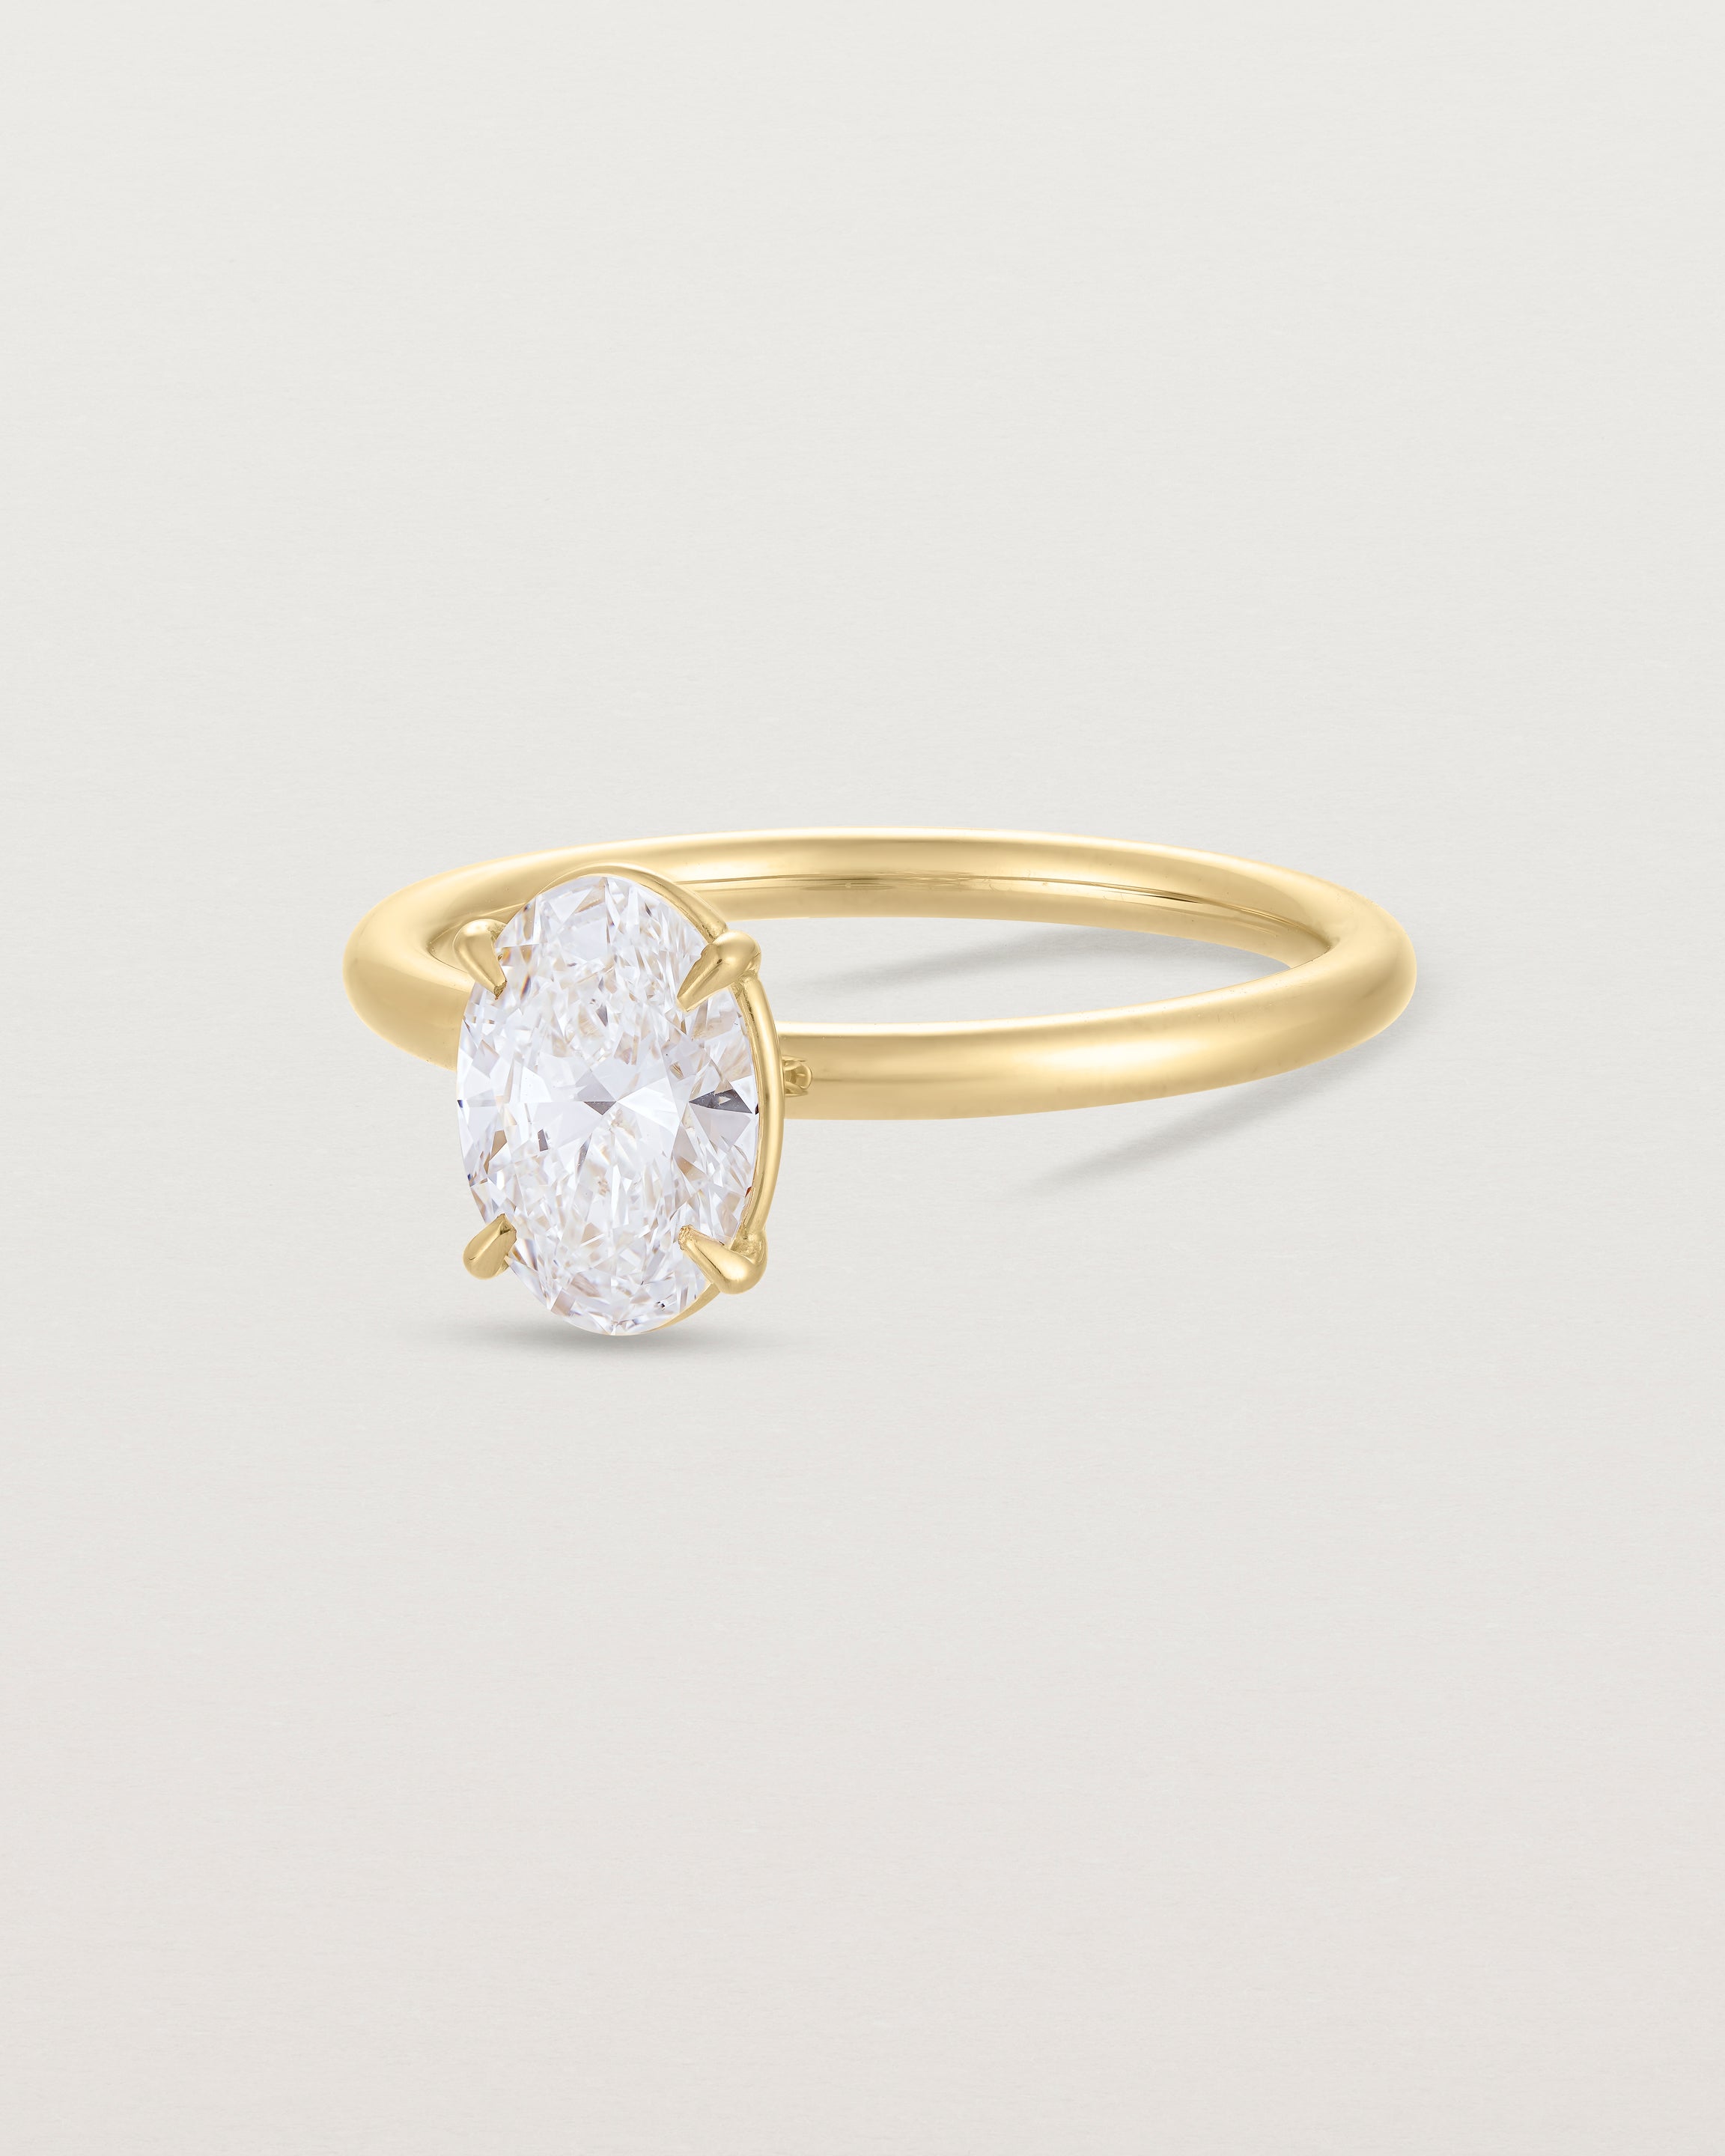 Angled view of the No. 112 Signature Solitaire | Laboratory Grown Diamond in yellow gold.